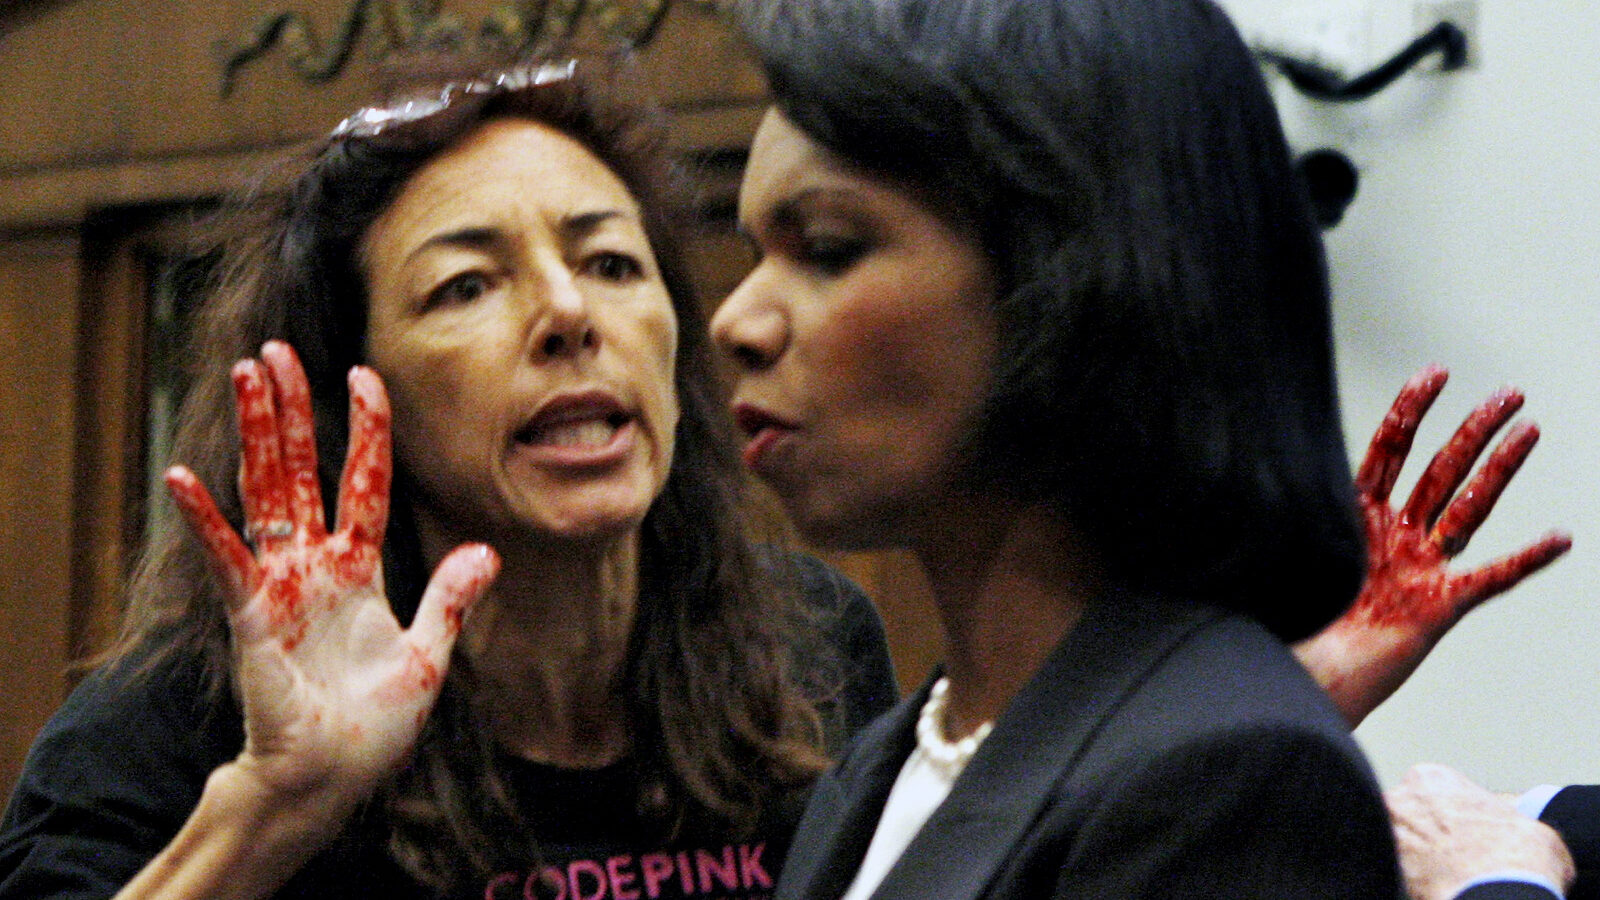 Code Pink member Desiree Anita Ali-Fairooz, pictured here confronting Secretary of State Condoleezza Rice over the Iraq war, has been convicted of being disruptive at US Attorney General Jeff Sessions' confirmation hearing. (AP/Charles Dharapak)